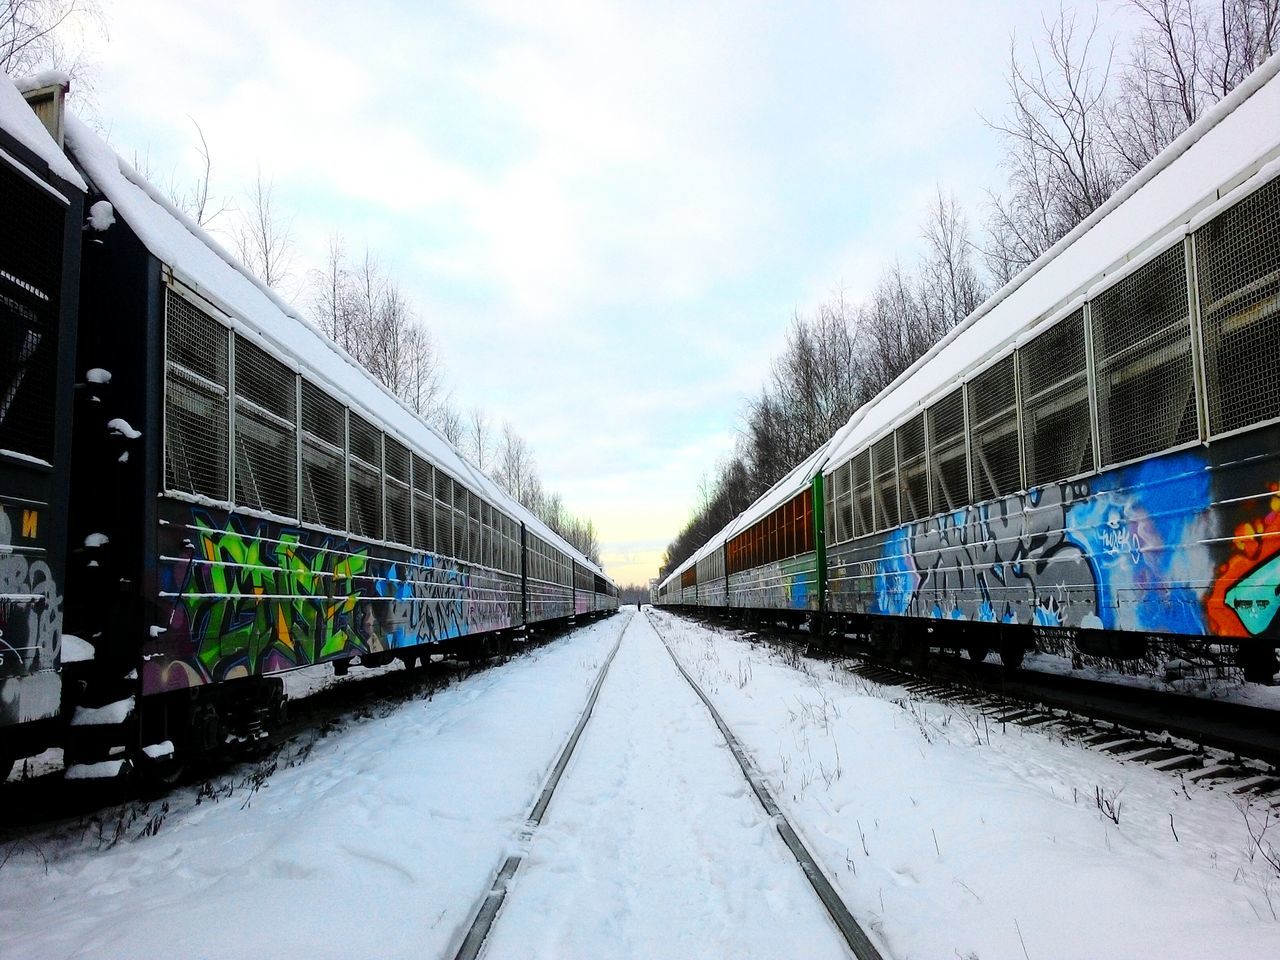 the way forward, diminishing perspective, transportation, snow, winter, cold temperature, graffiti, built structure, architecture, vanishing point, season, building exterior, road, street, bare tree, tree, weather, covering, city, sky